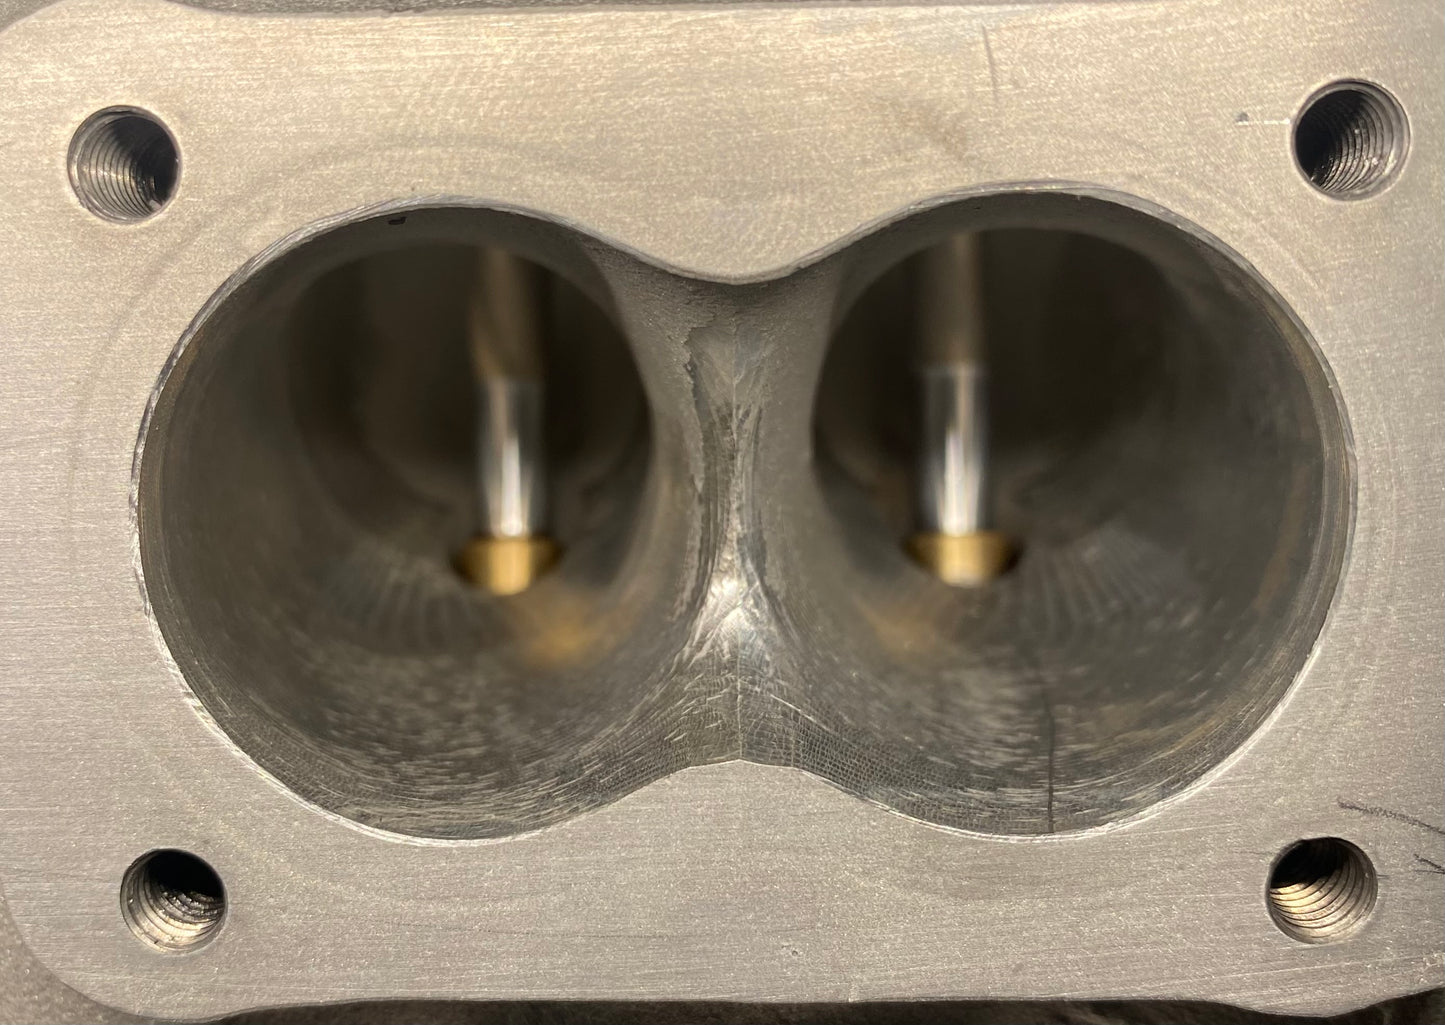 S14 Stage 3 Performance Cylinder Head